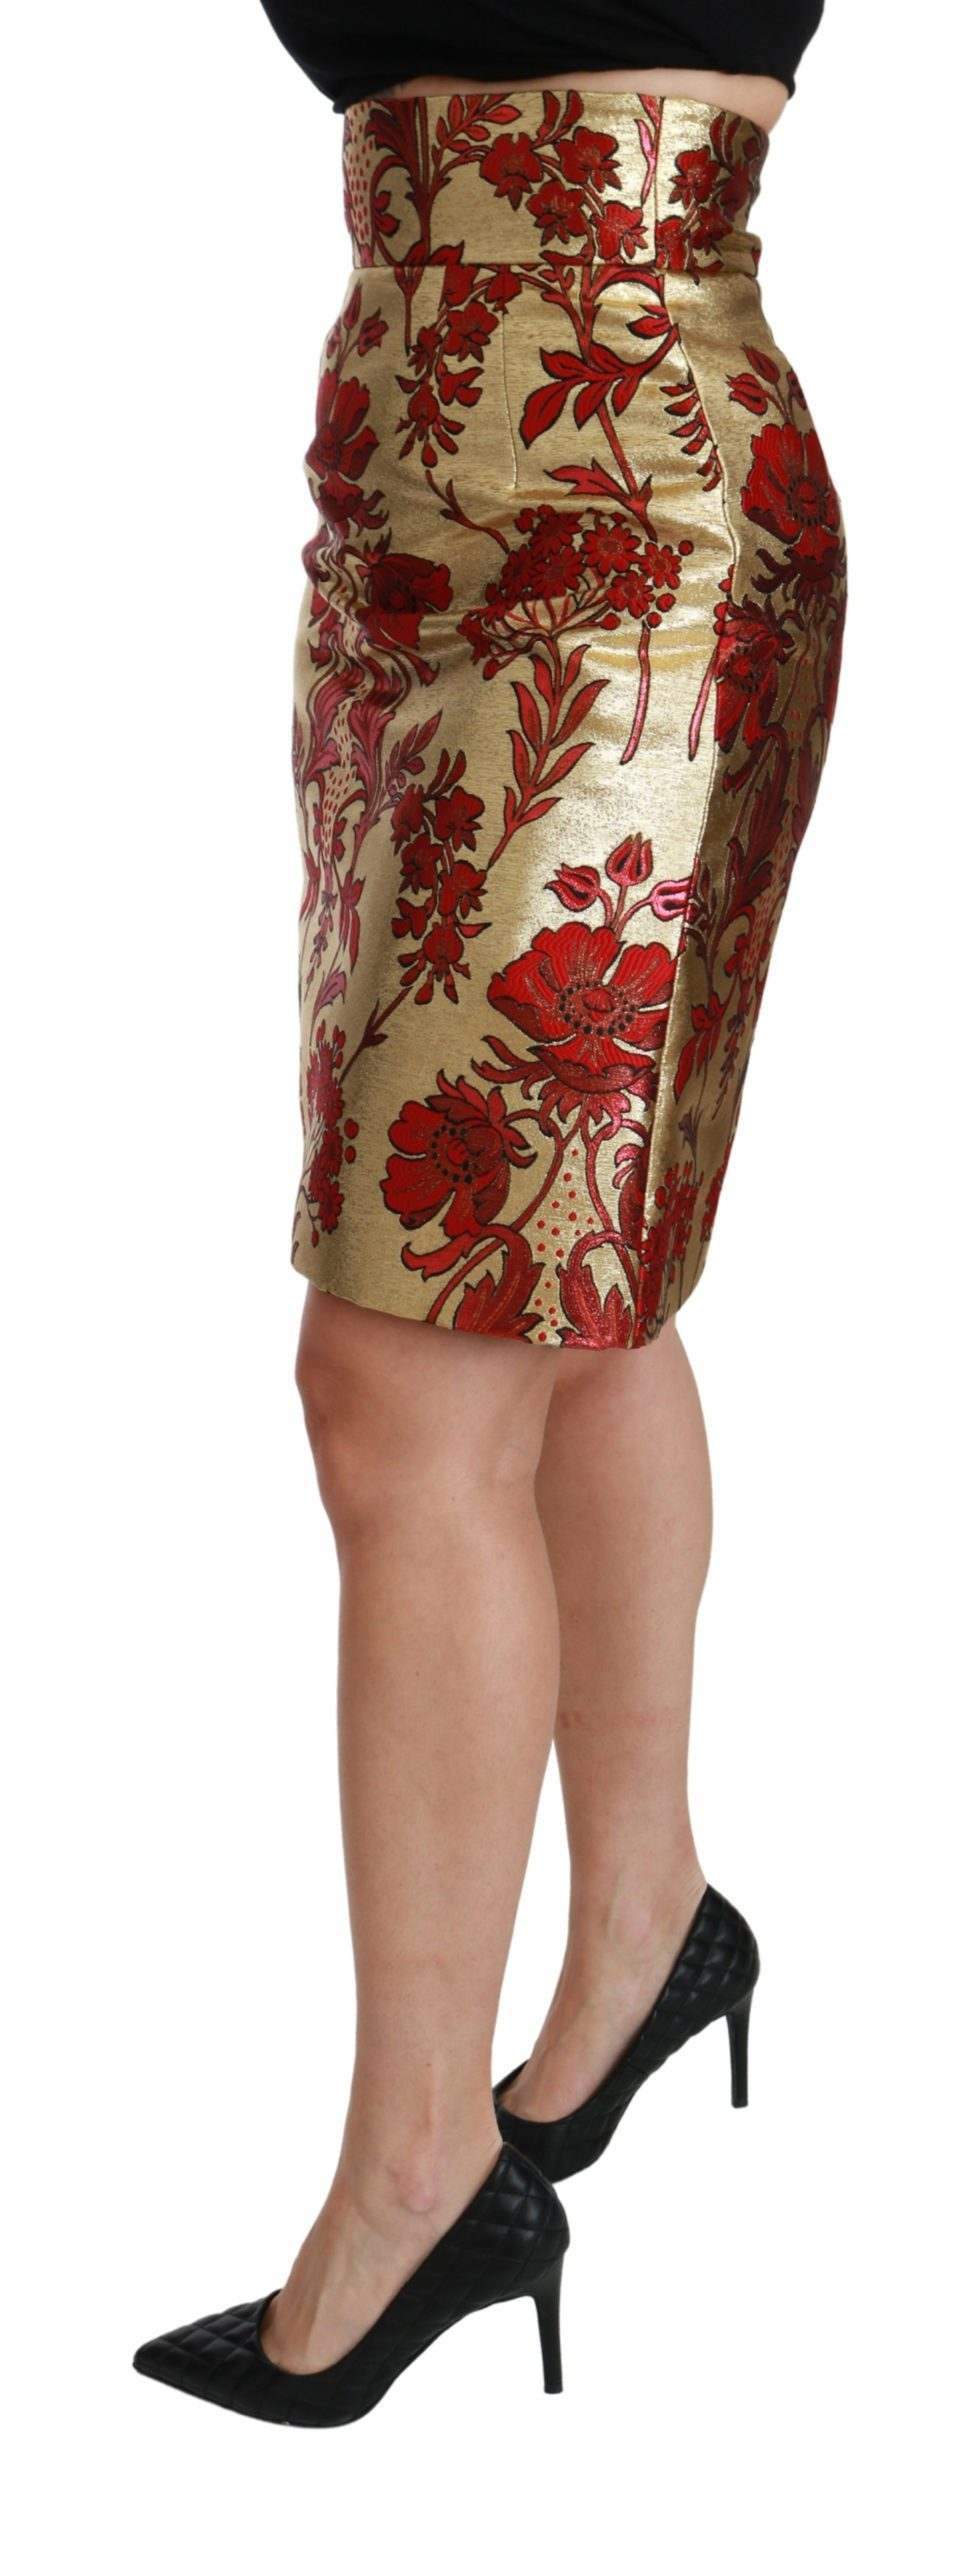 Dolce & Gabbana Gold Floral Jacquard High Waist Mini Skirt #women, Brand_Dolce & Gabbana, Catch, Dolce & Gabbana, feed-agegroup-adult, feed-color-gold, feed-gender-female, feed-size-IT36 | XS, feed-size-IT38|XS, feed-size-IT40|S, feed-size-IT42|M, Gender_Women, Gold, IT36 | XS, IT38|XS, IT40|S, IT42|M, IT44|L, IT46|XL, Kogan, Skirts - Women - Clothing, Women - New Arrivals at SEYMAYKA